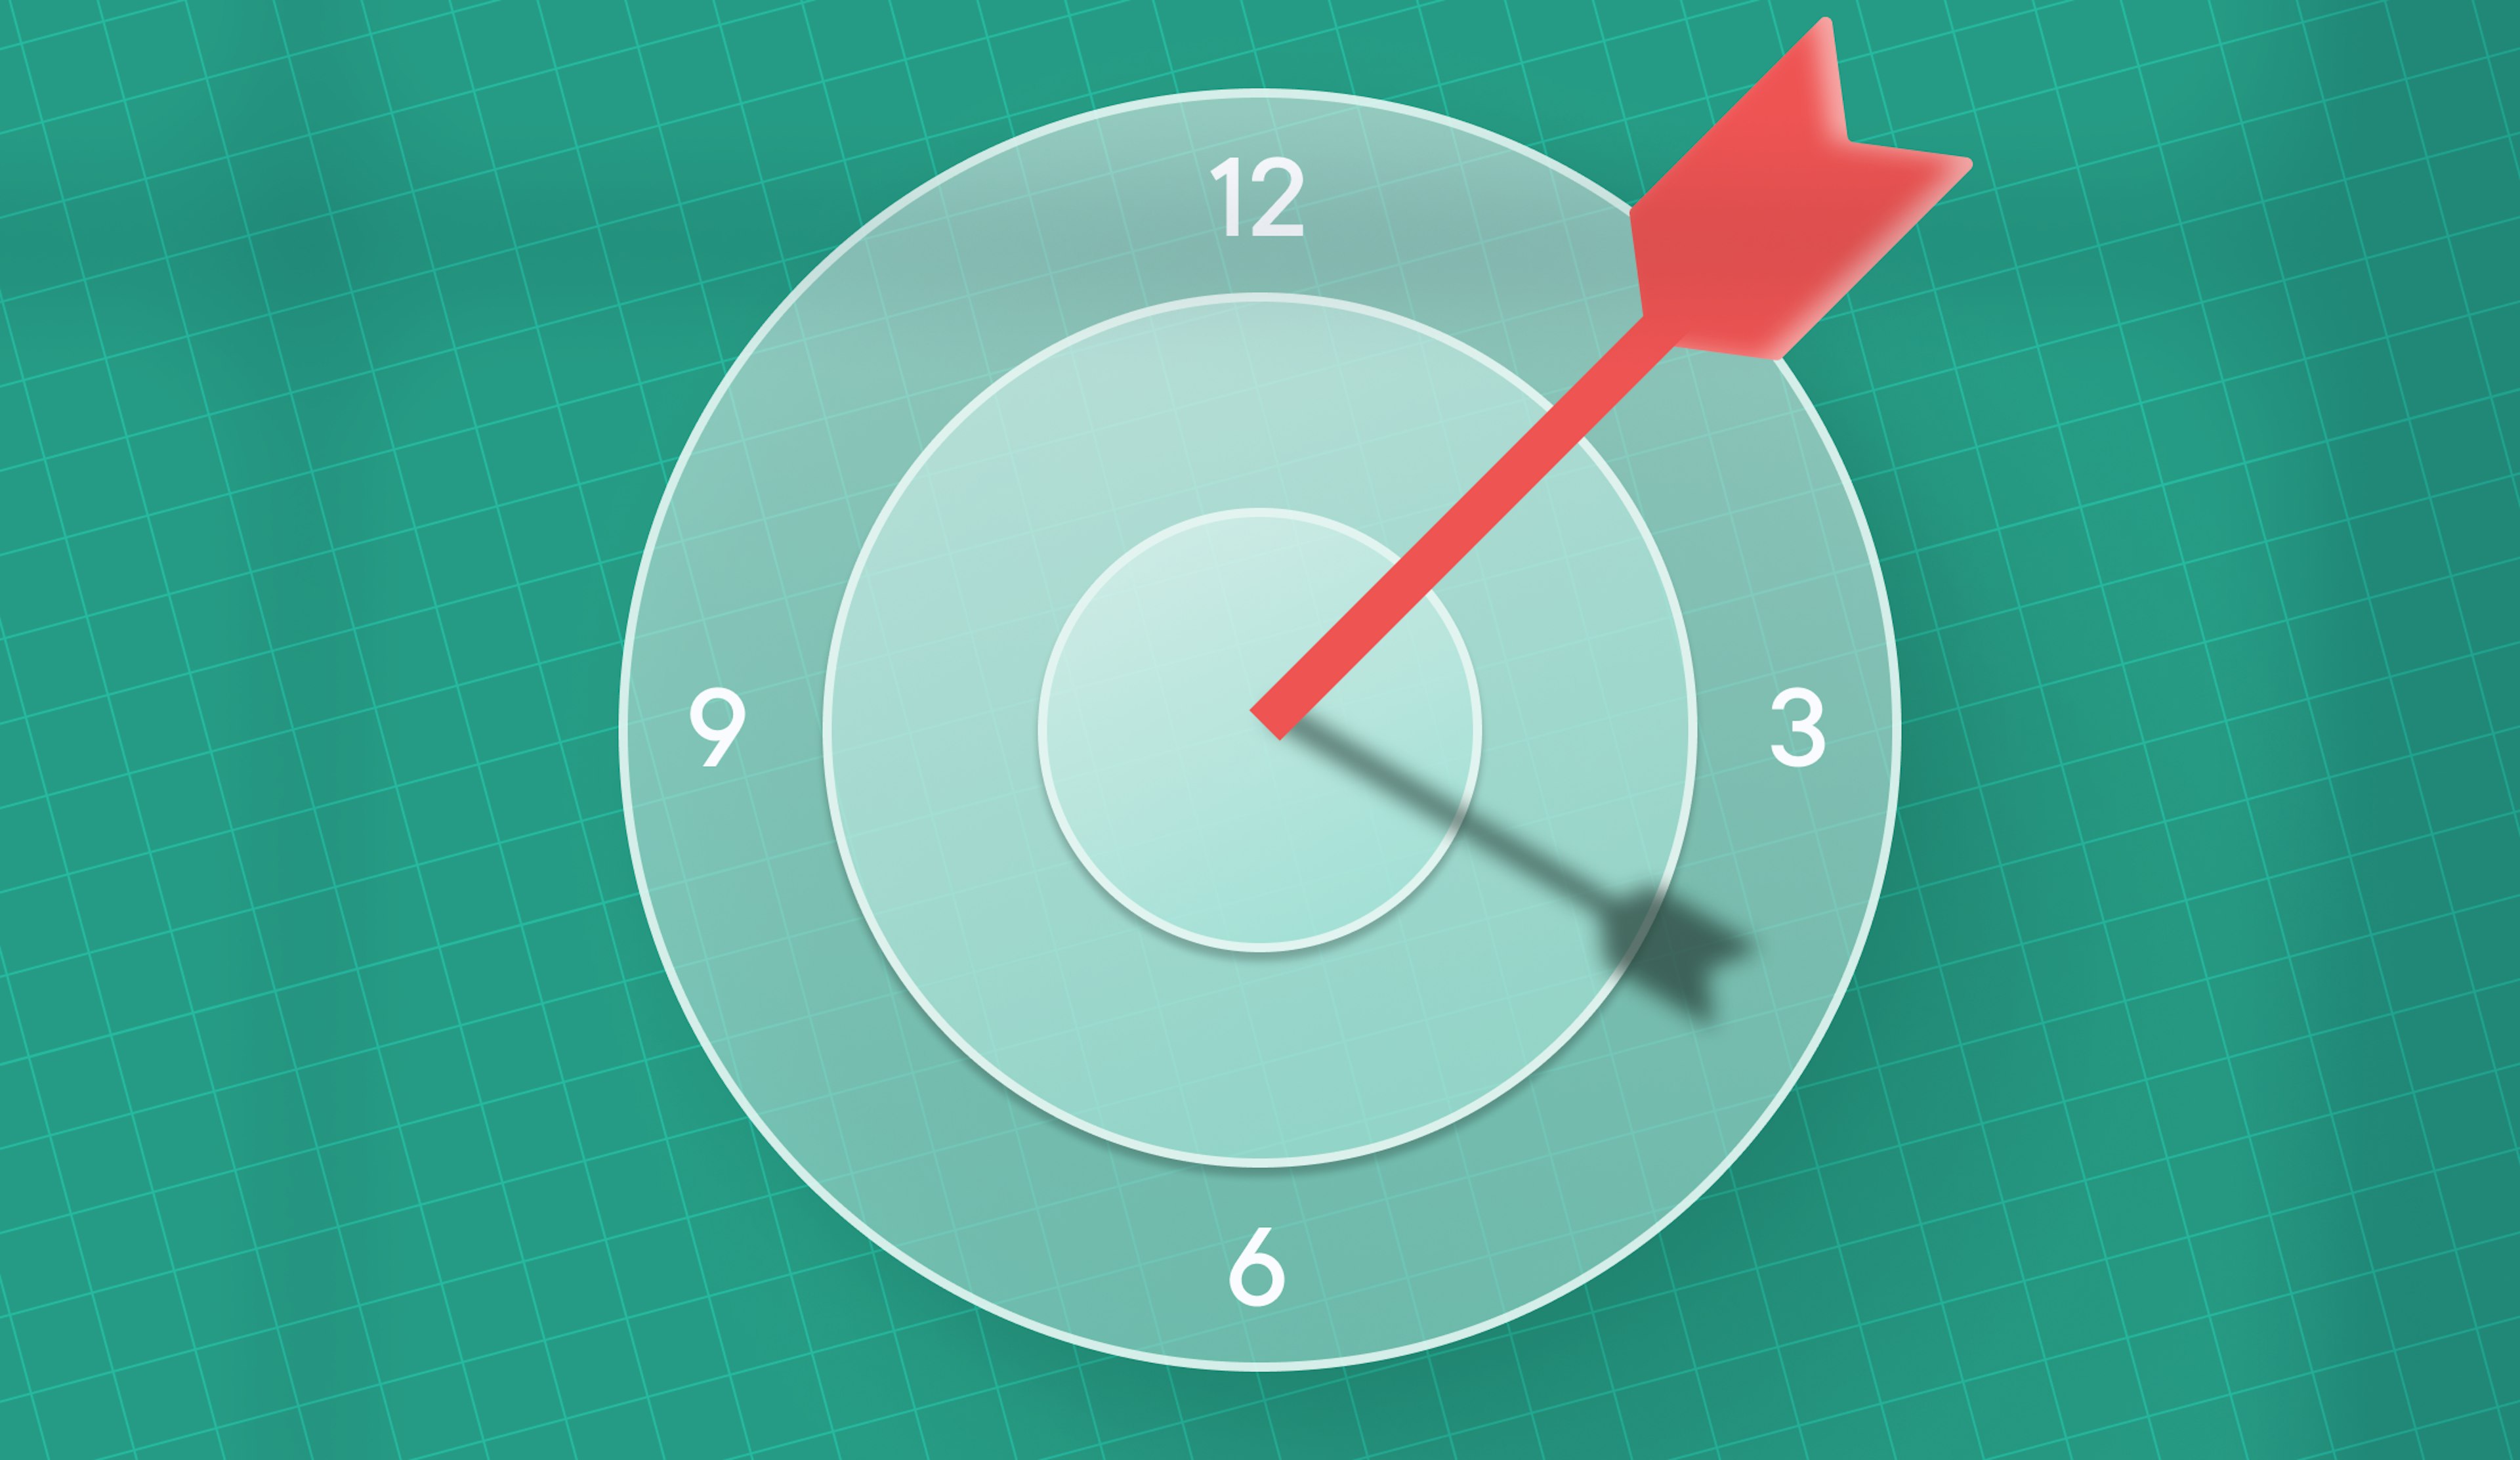 A target which doubles as a clock, with the arrow and the arrow's shadow acting as the hands of the clock.